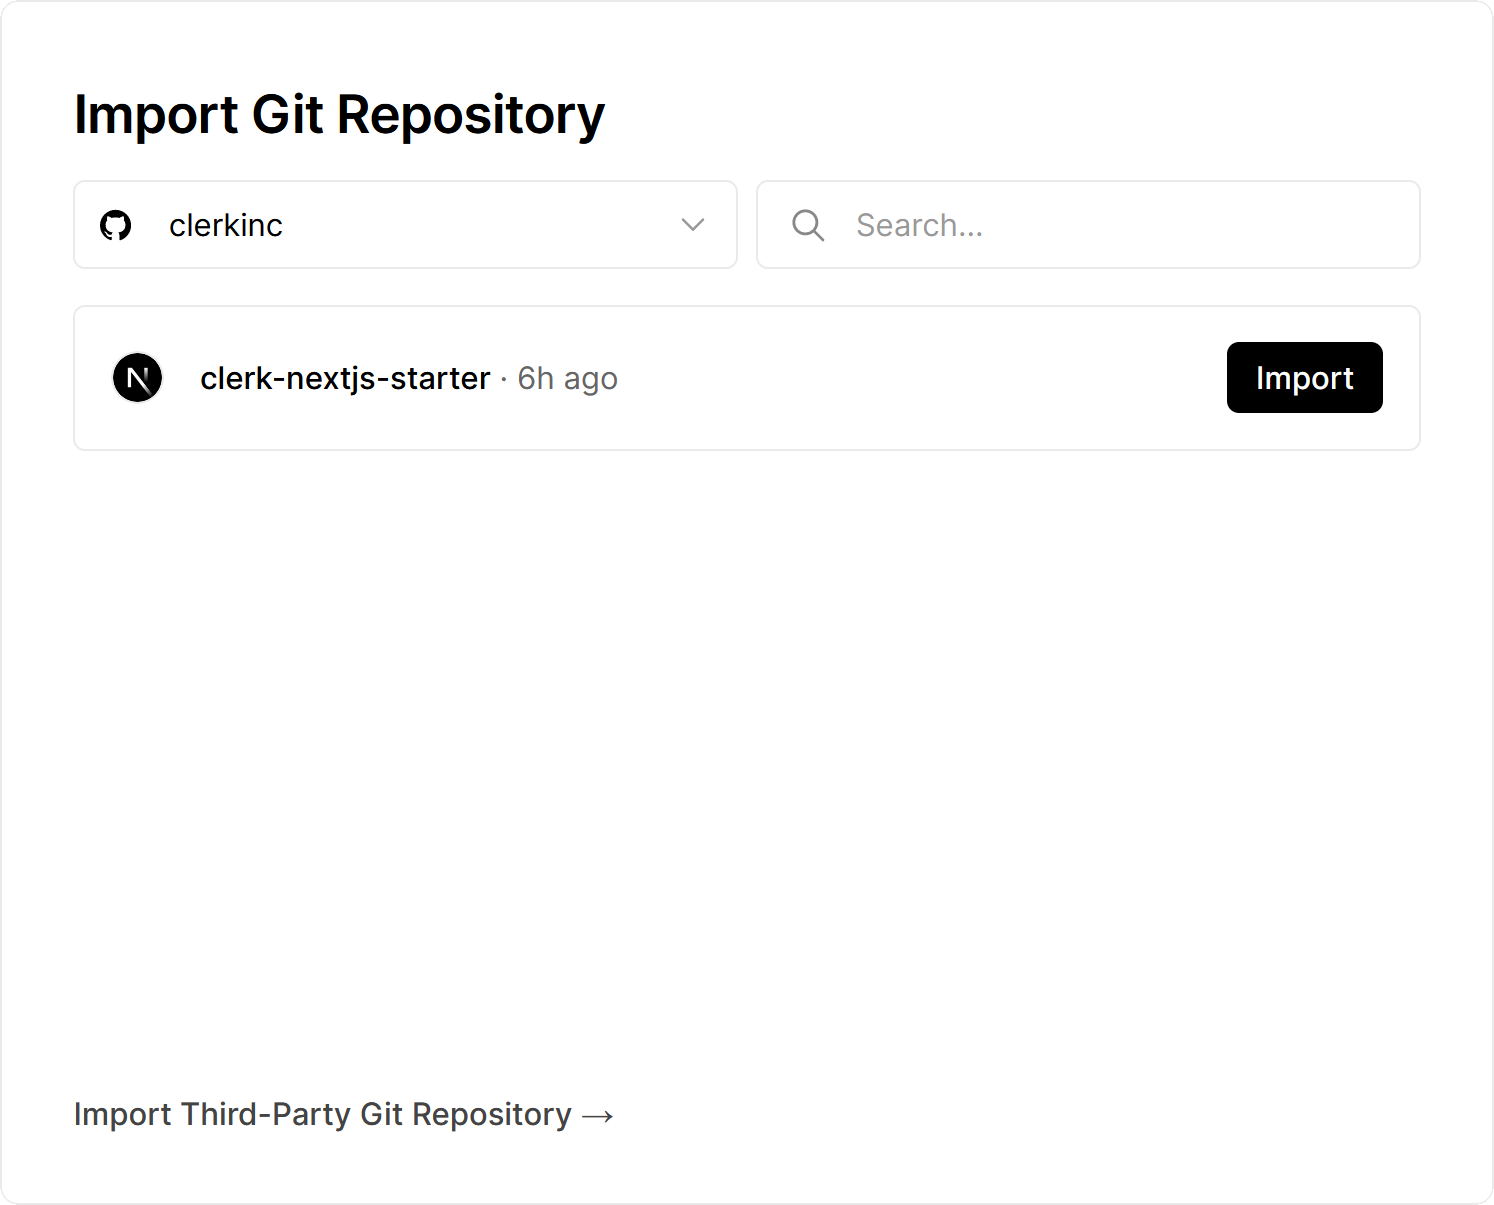 An "Import Git Repository" screen provides a few options, including selecting an organization and list of related repositories to import